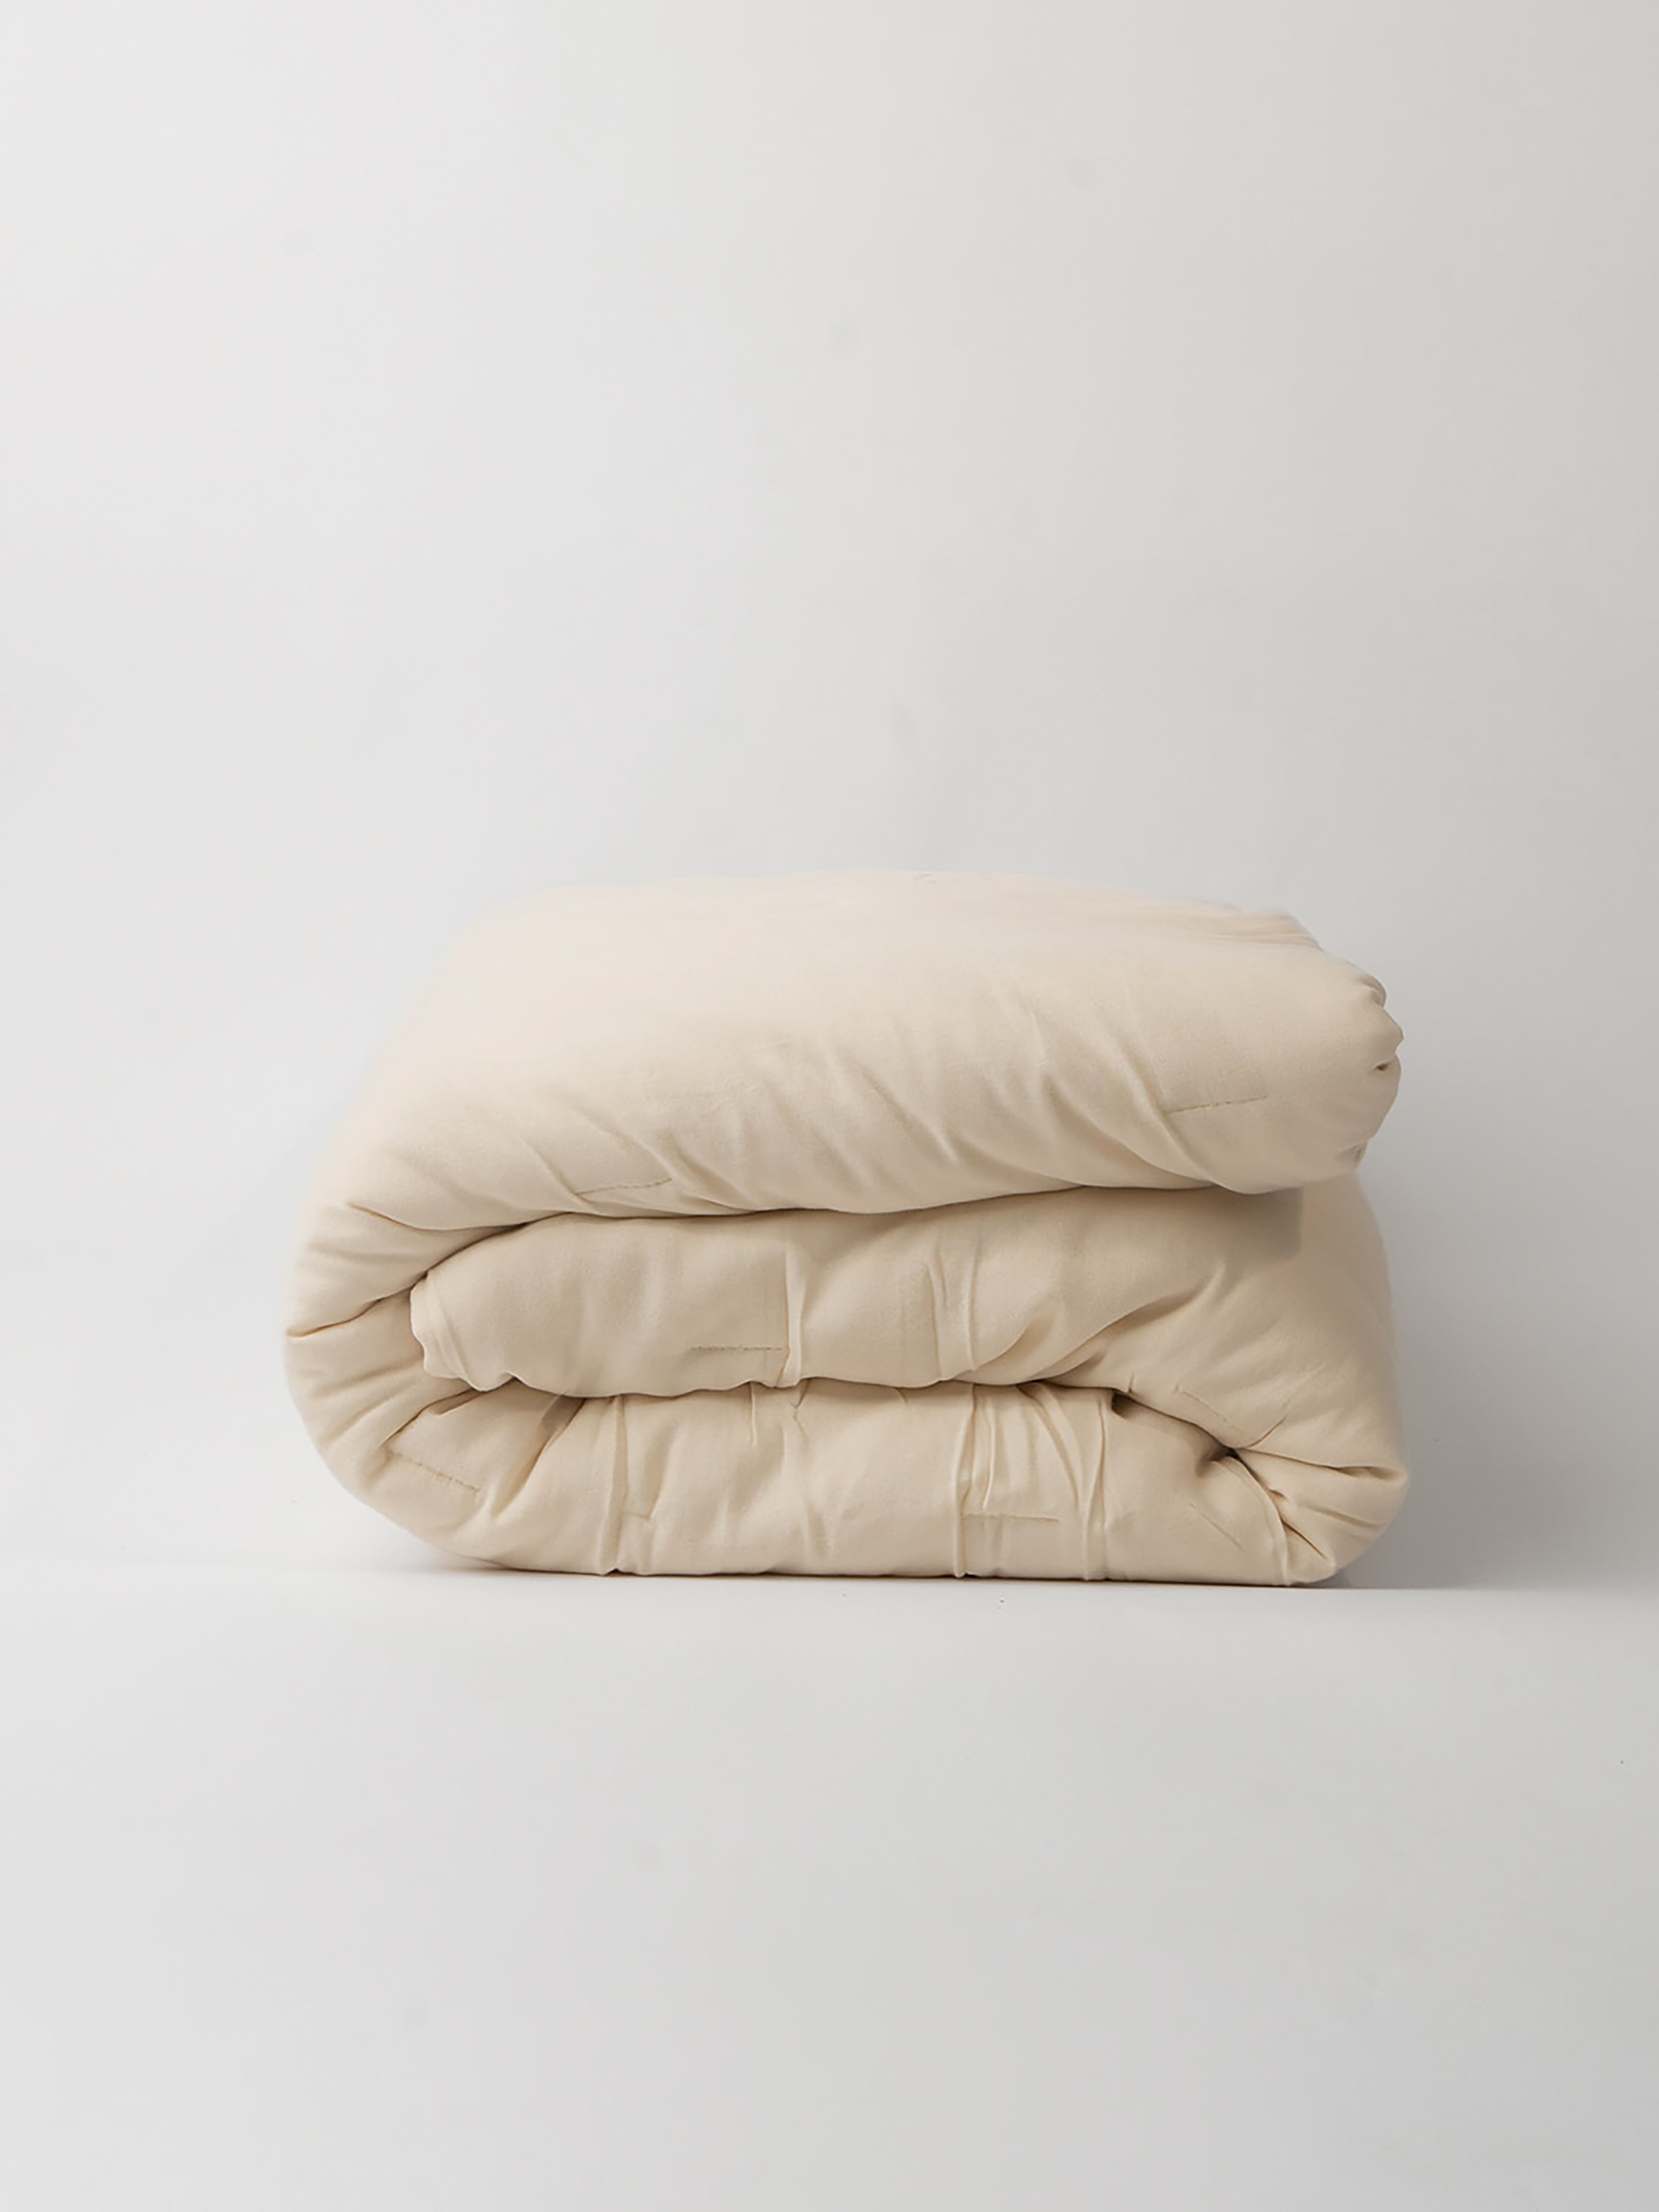 Buttermilk Aire Bamboo Puckered Quilt. The Quilt has been photographed with a white background.|Color:Buttermilk